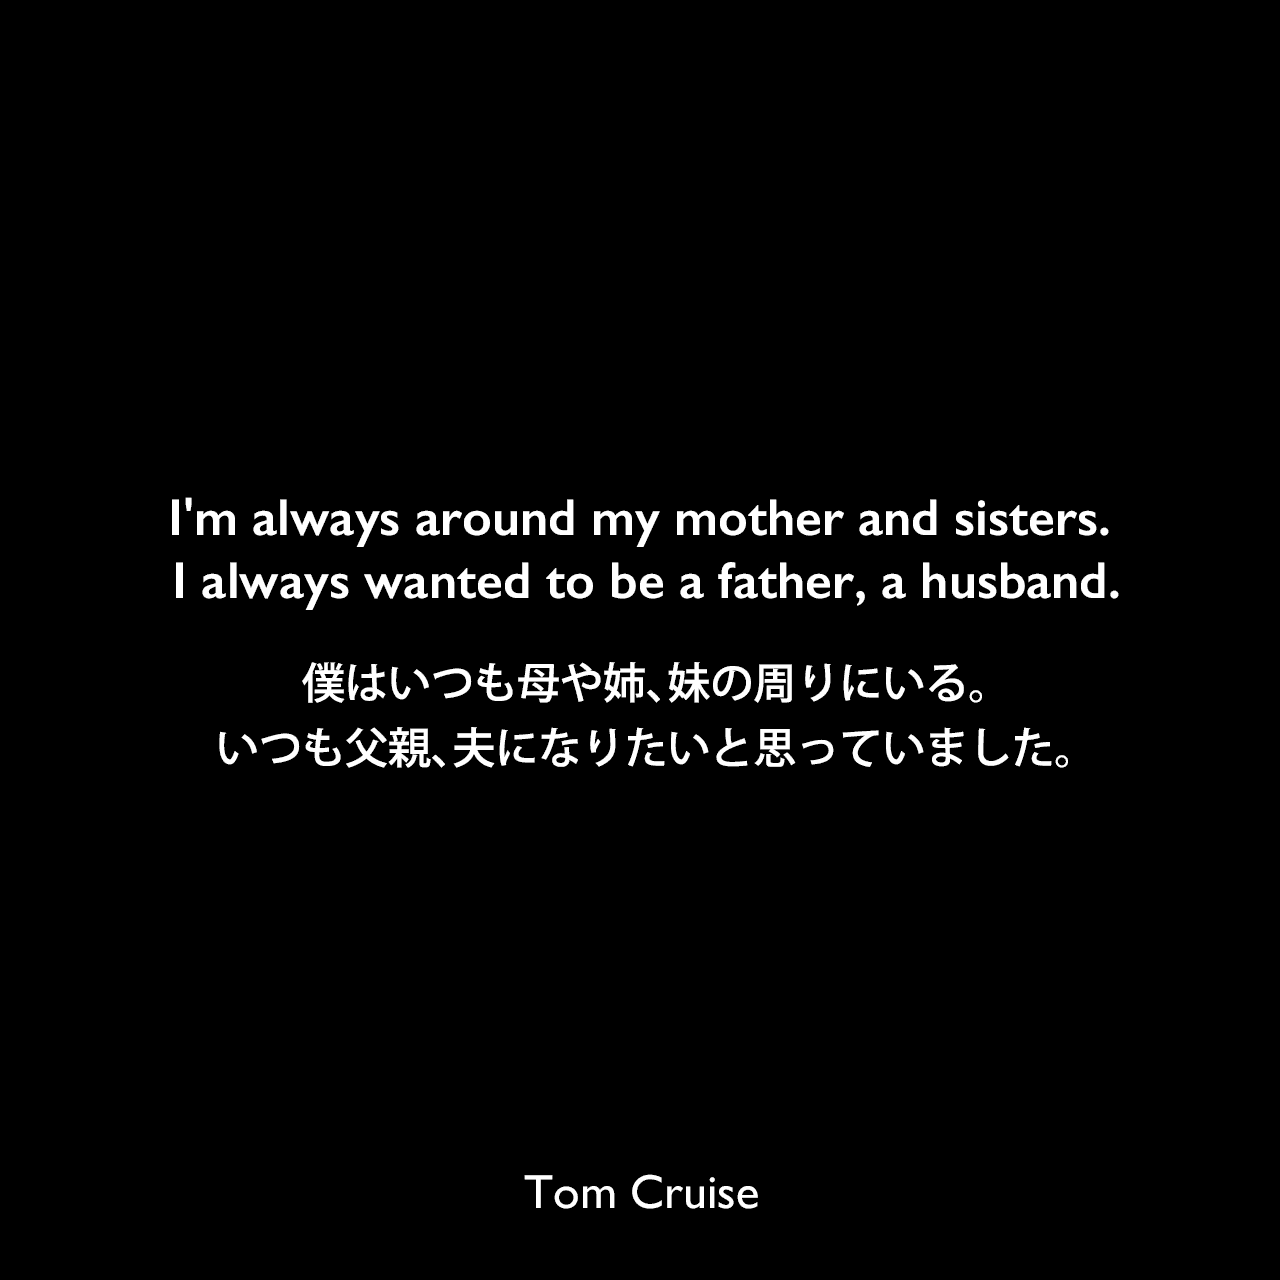 I'm always around my mother and sisters. I always wanted to be a father, a husband.僕はいつも母や姉、妹の周りにいる。いつも父親、夫になりたいと思っていました。Tom Cruise